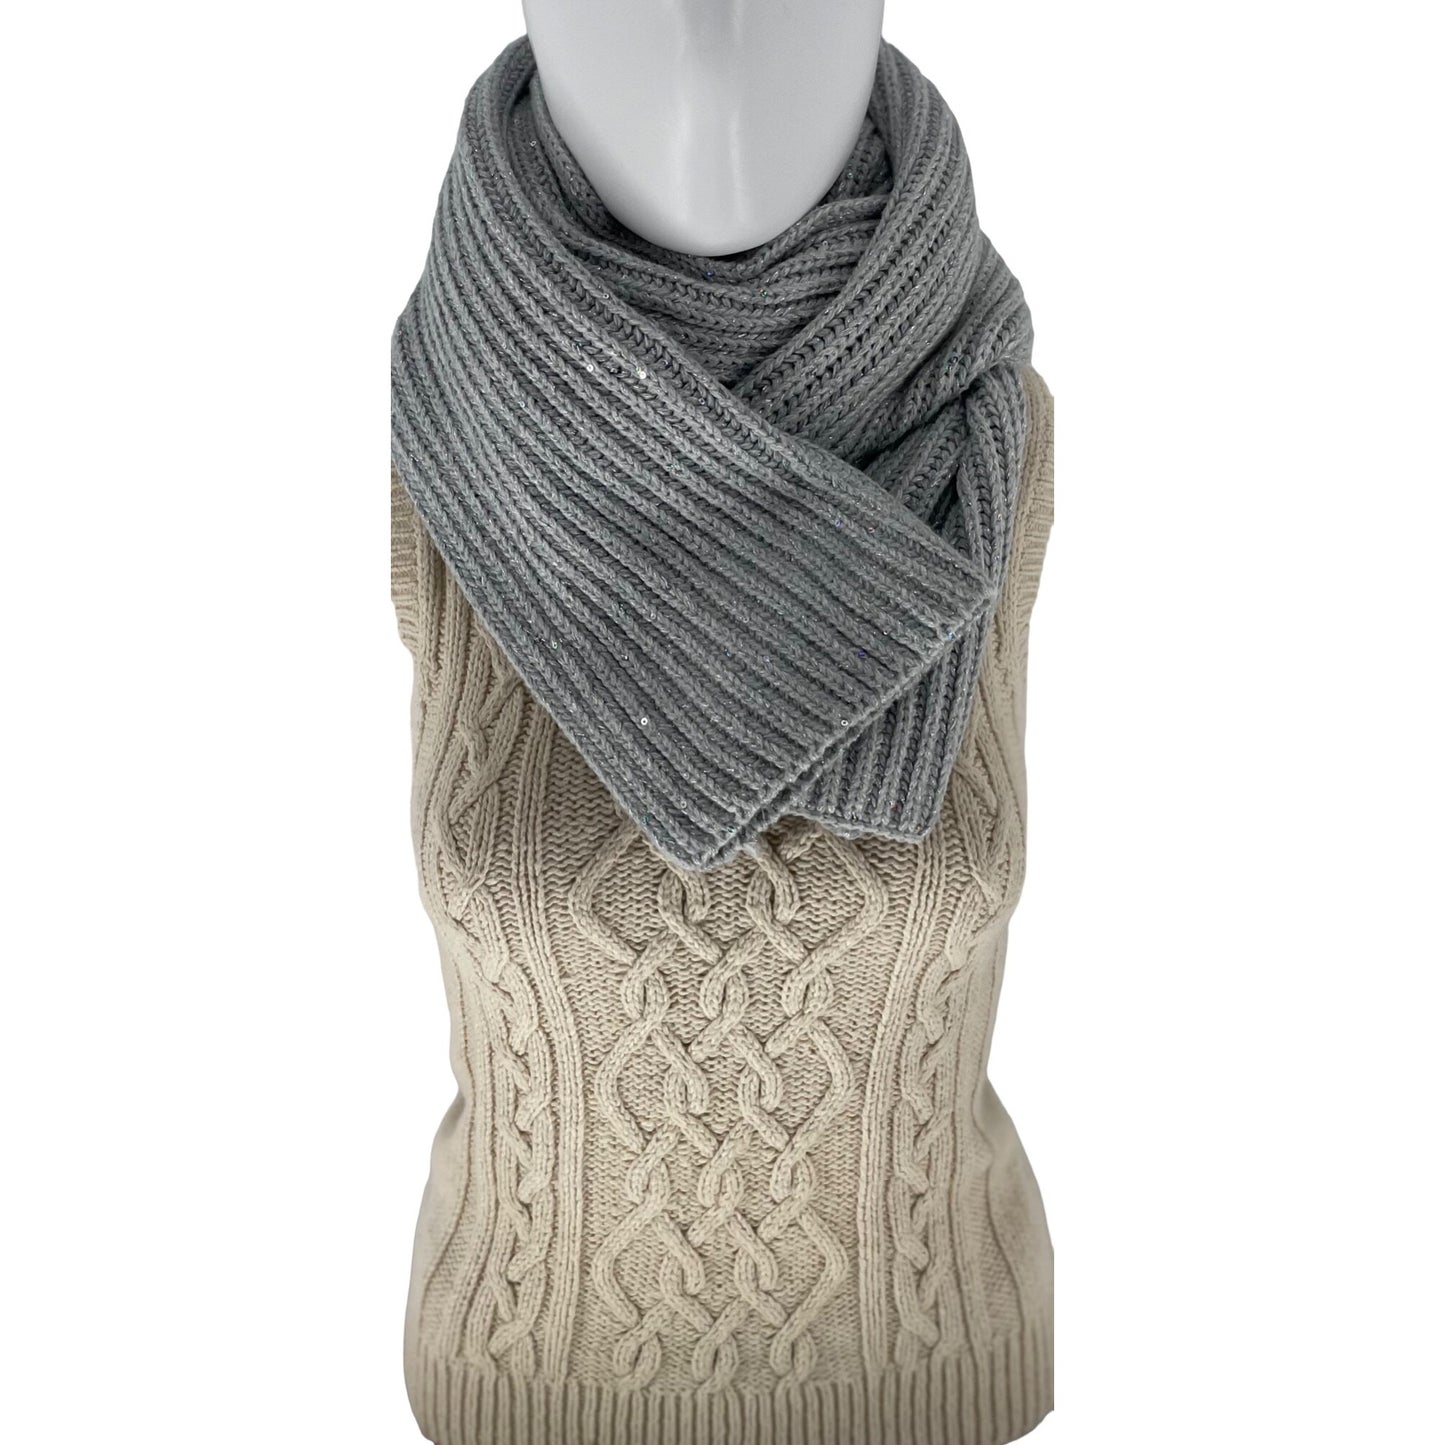 Express Women's Sparkly Grey Knit Scarf W/ Silver Sequins